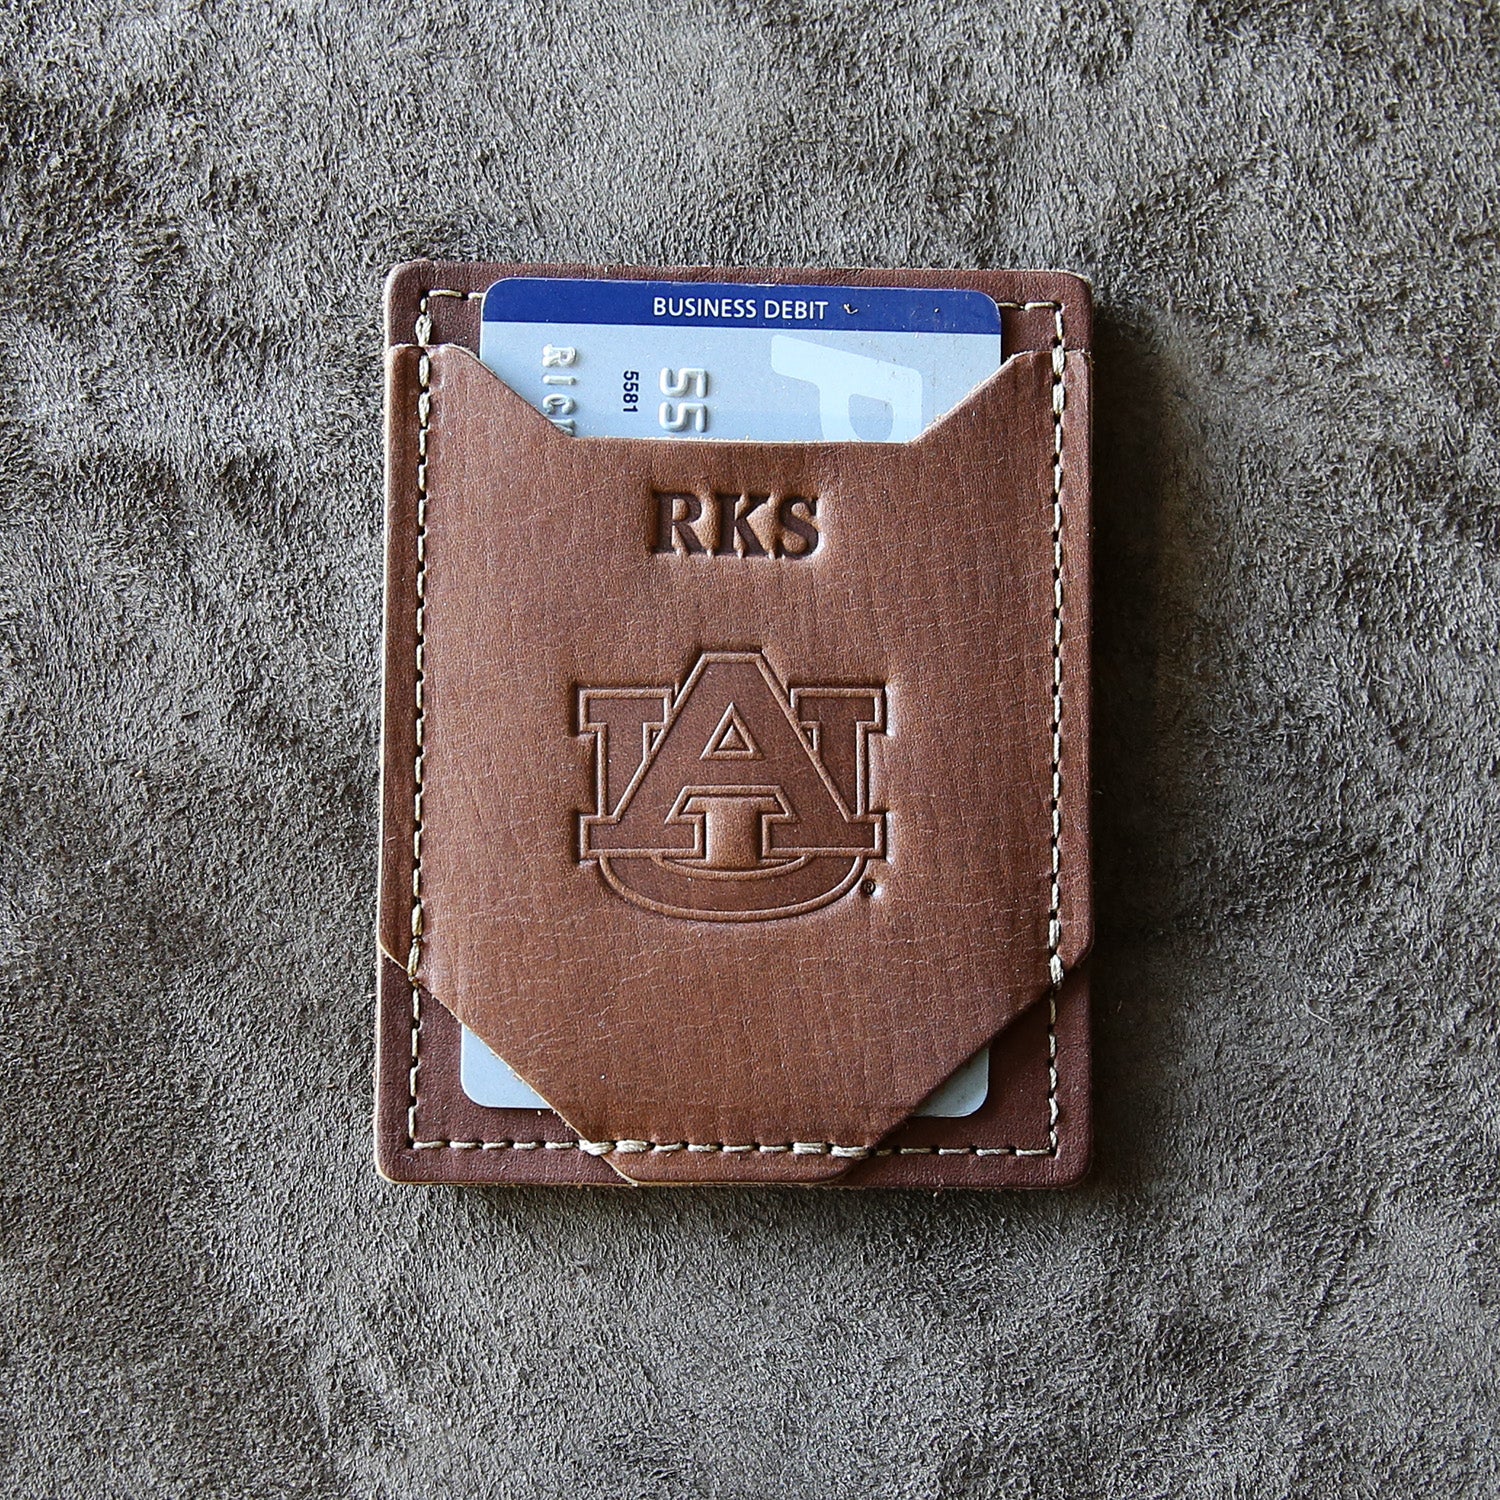 Money clip front pocket wallet with Auburn logo and personalized initials